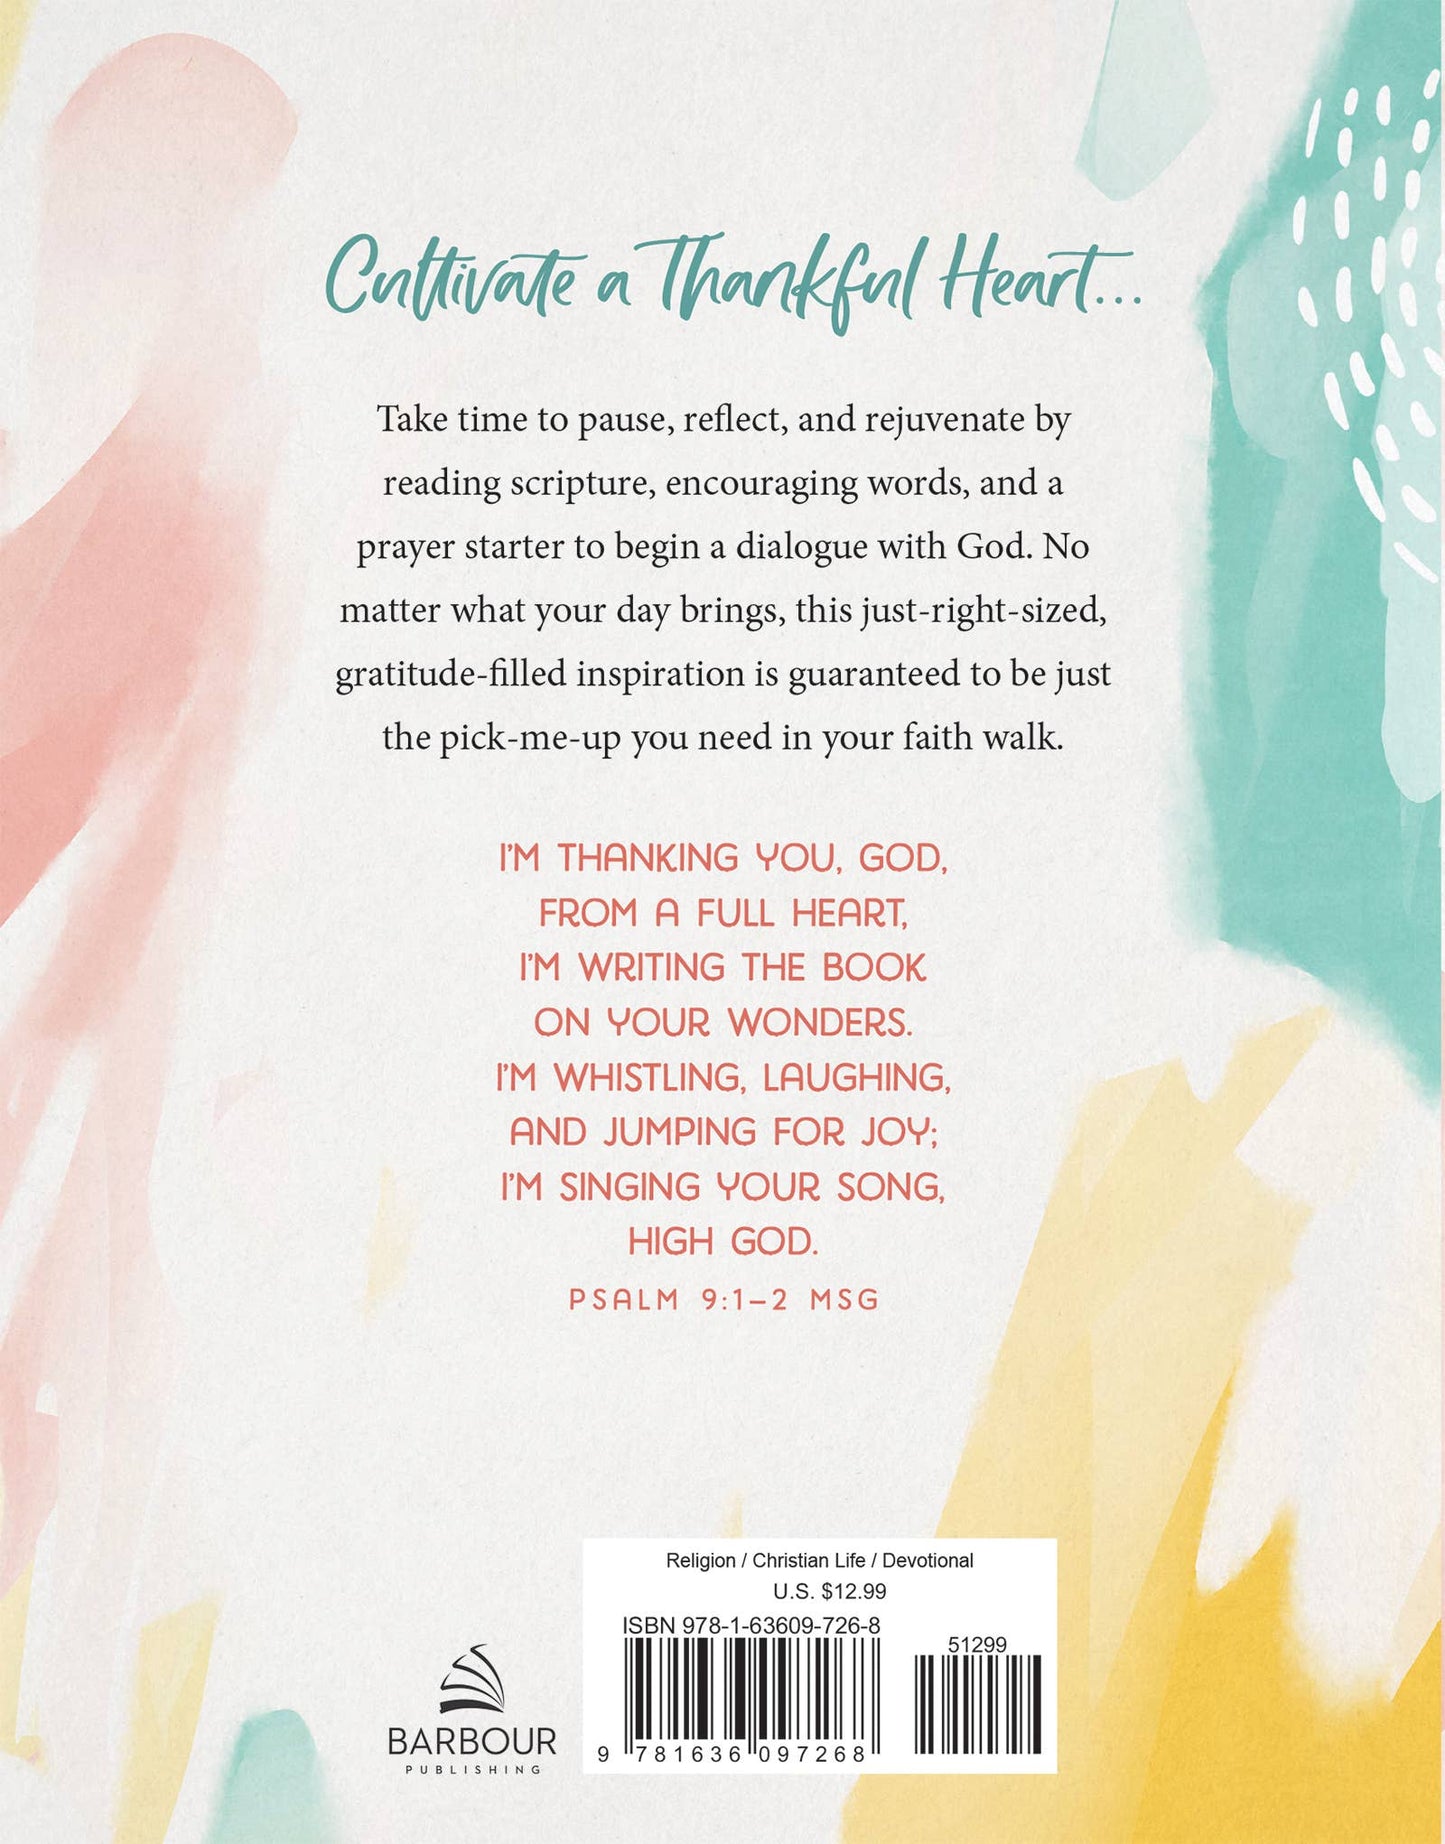 3-Minute Devotions for a Thankful Heart